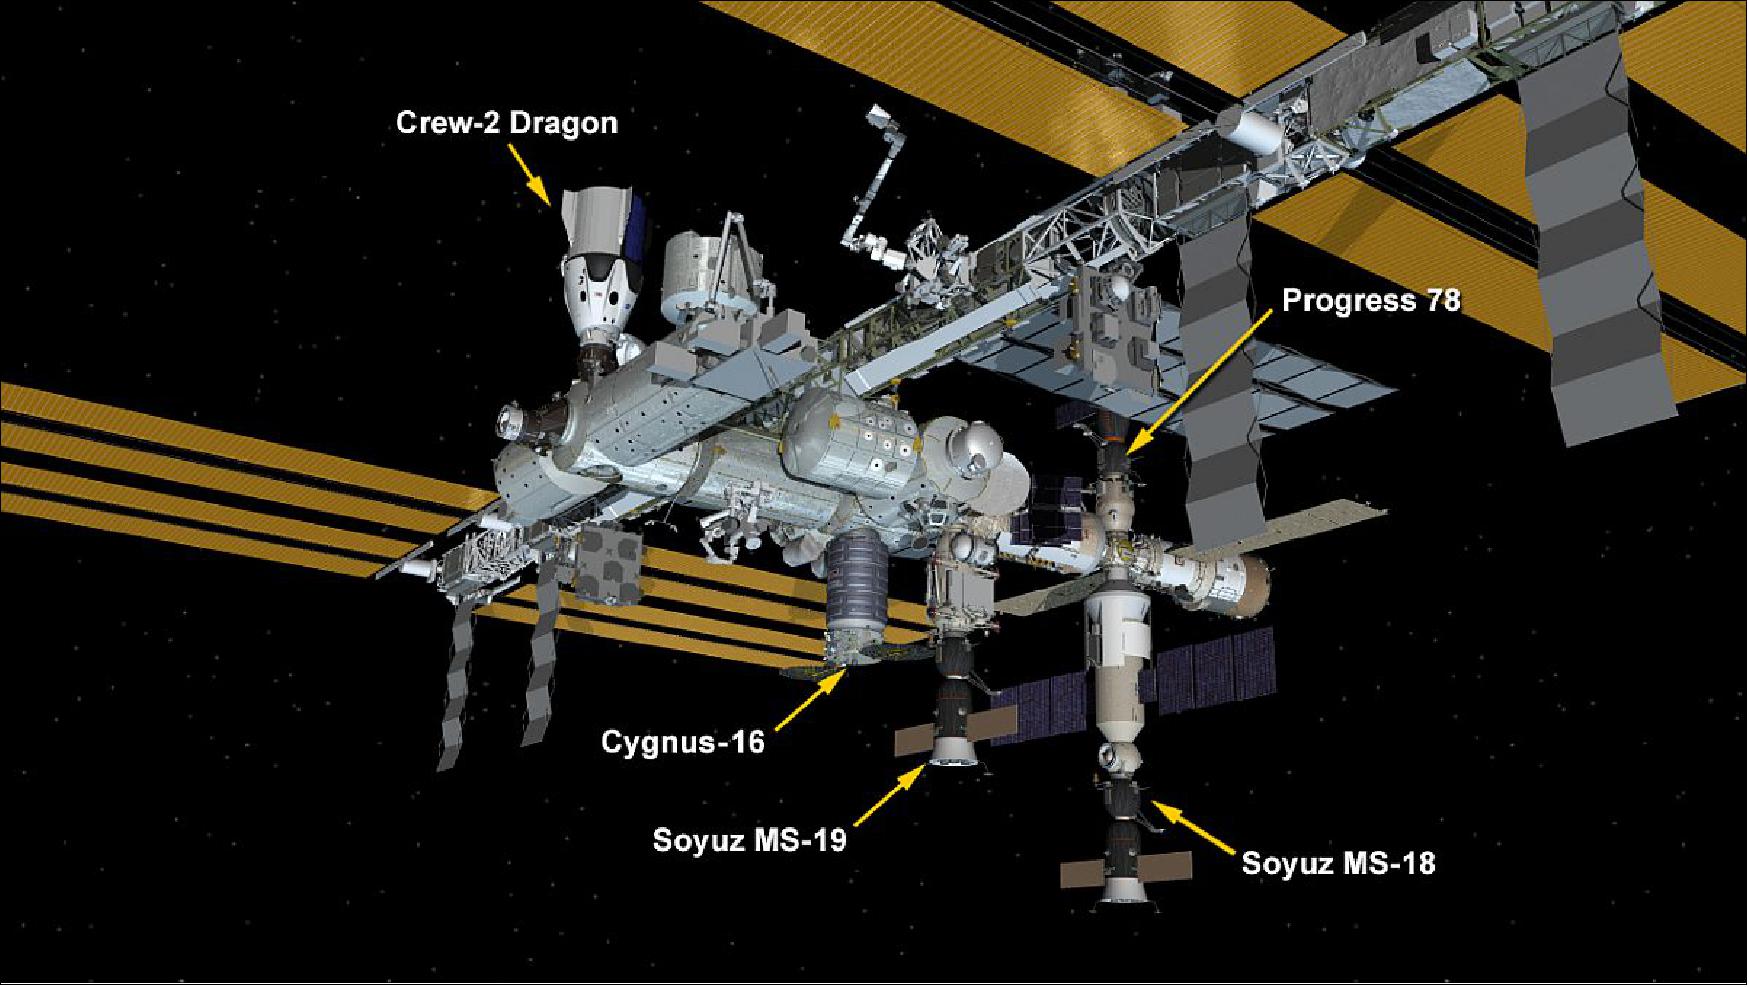 Figure 28: Five spaceships are parked at the space station including Northrop Grumman's Cygnus space freighter; the SpaceX Crew Dragon vehicle; and Russia's Soyuz MS-18 and MS-19 crew ships and ISS Progress 78 resupply ship (image credit: NASA)